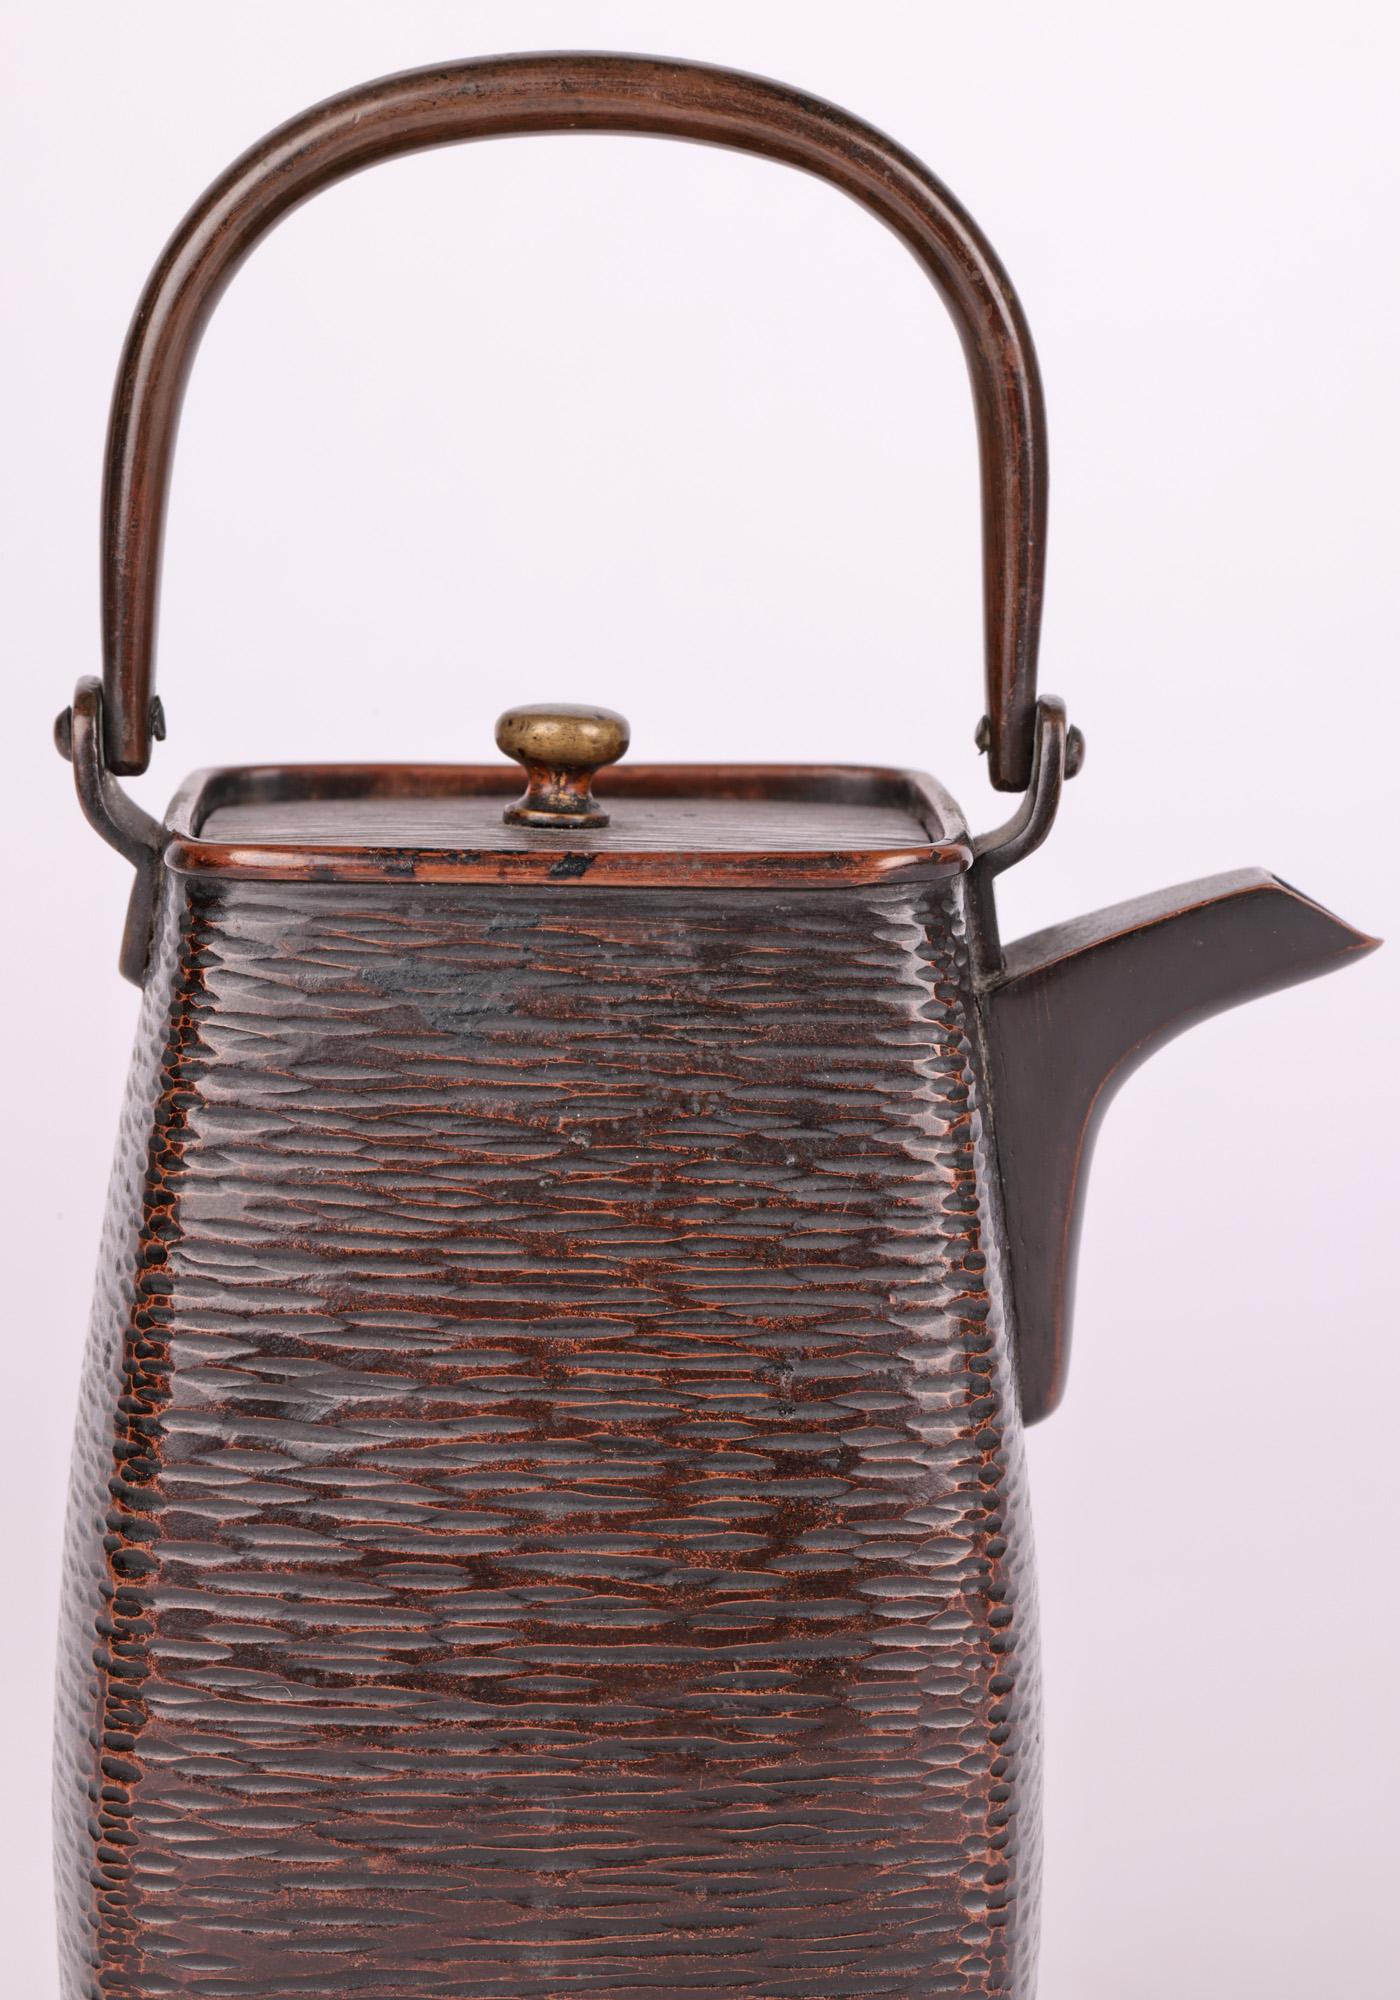 An exceptional quality Japanese Meiji bronze sake pot decorated with a basket weave patterning dating between 1868 and 1912 and probably made around 1890. The pot is elegantly shaped and could immediately be envisaged sitting on a scholar’s desk and